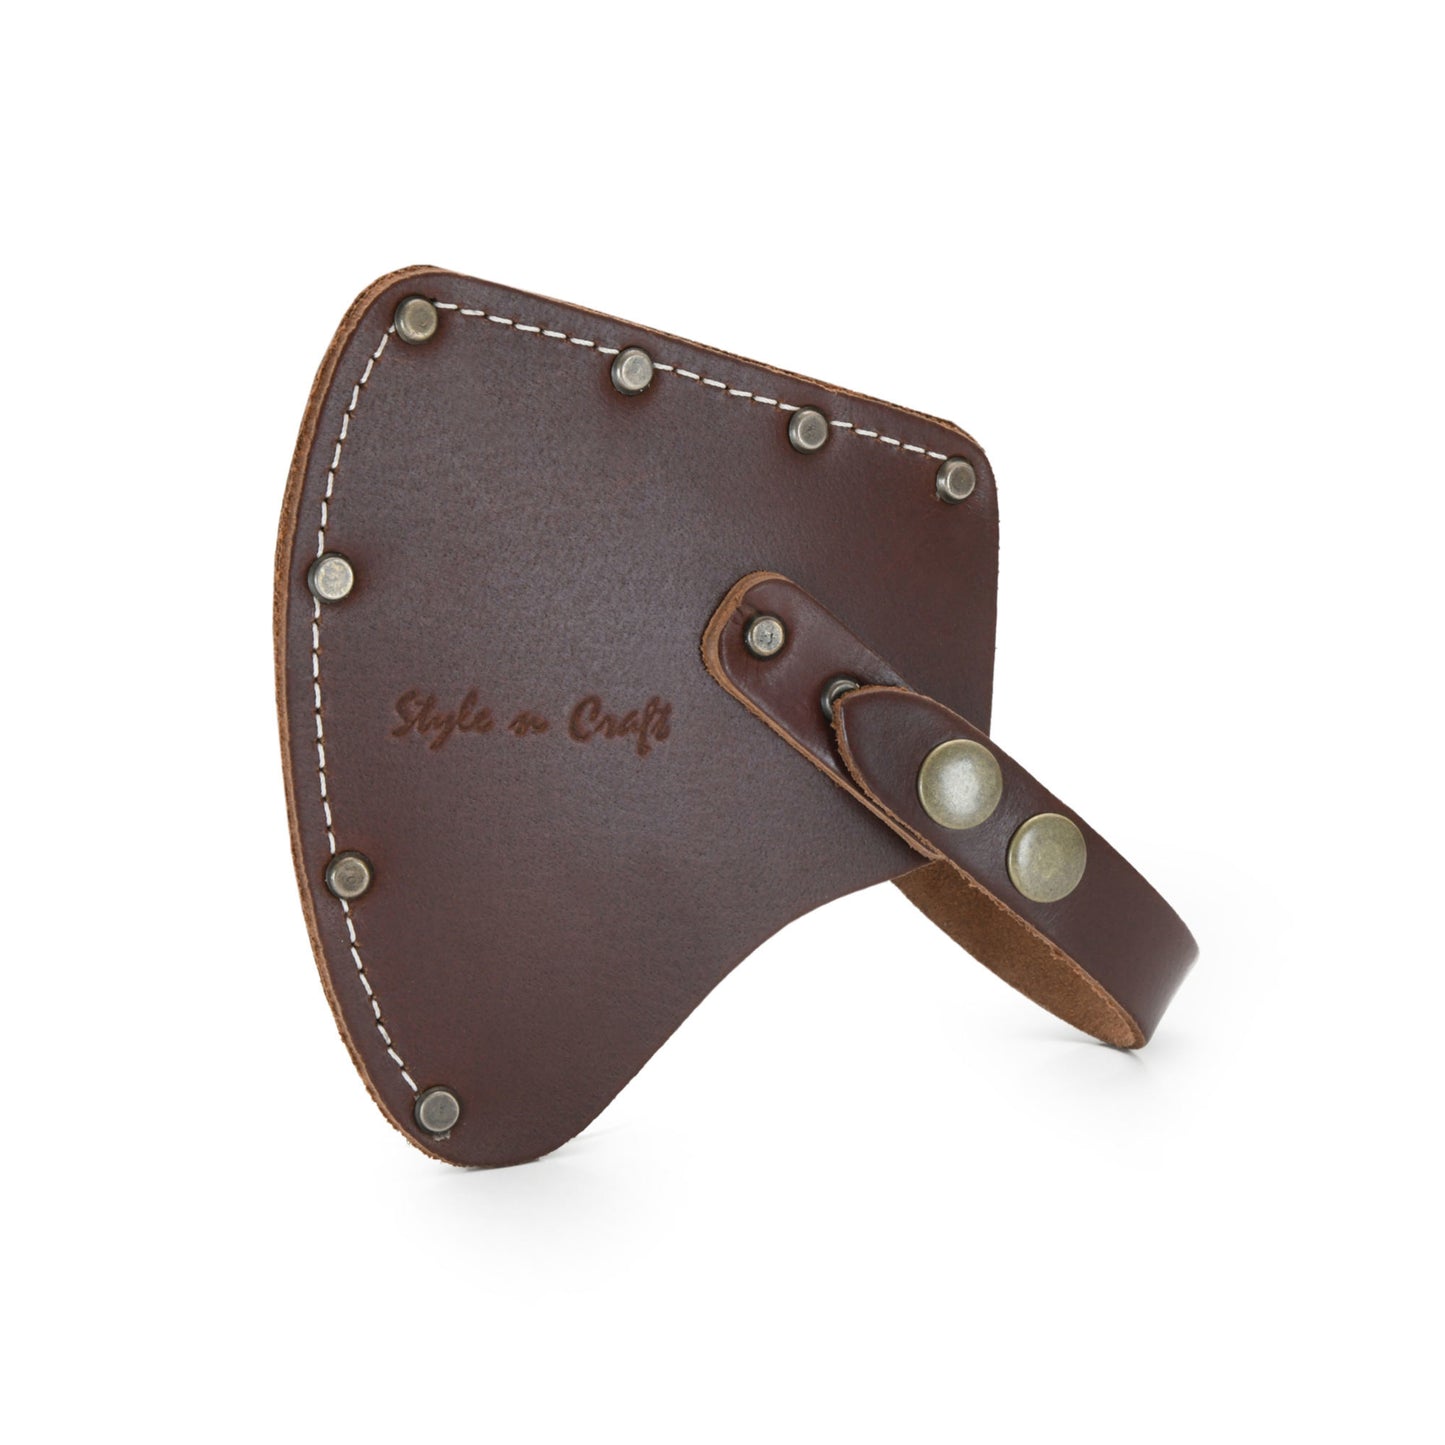 Style n Craft 98025 - Camper's Hatchet Sheath / Axe Cover in Heavy Top Grain Leather in Dark Tan Color. It has a Double Snap Button Closure - Front View